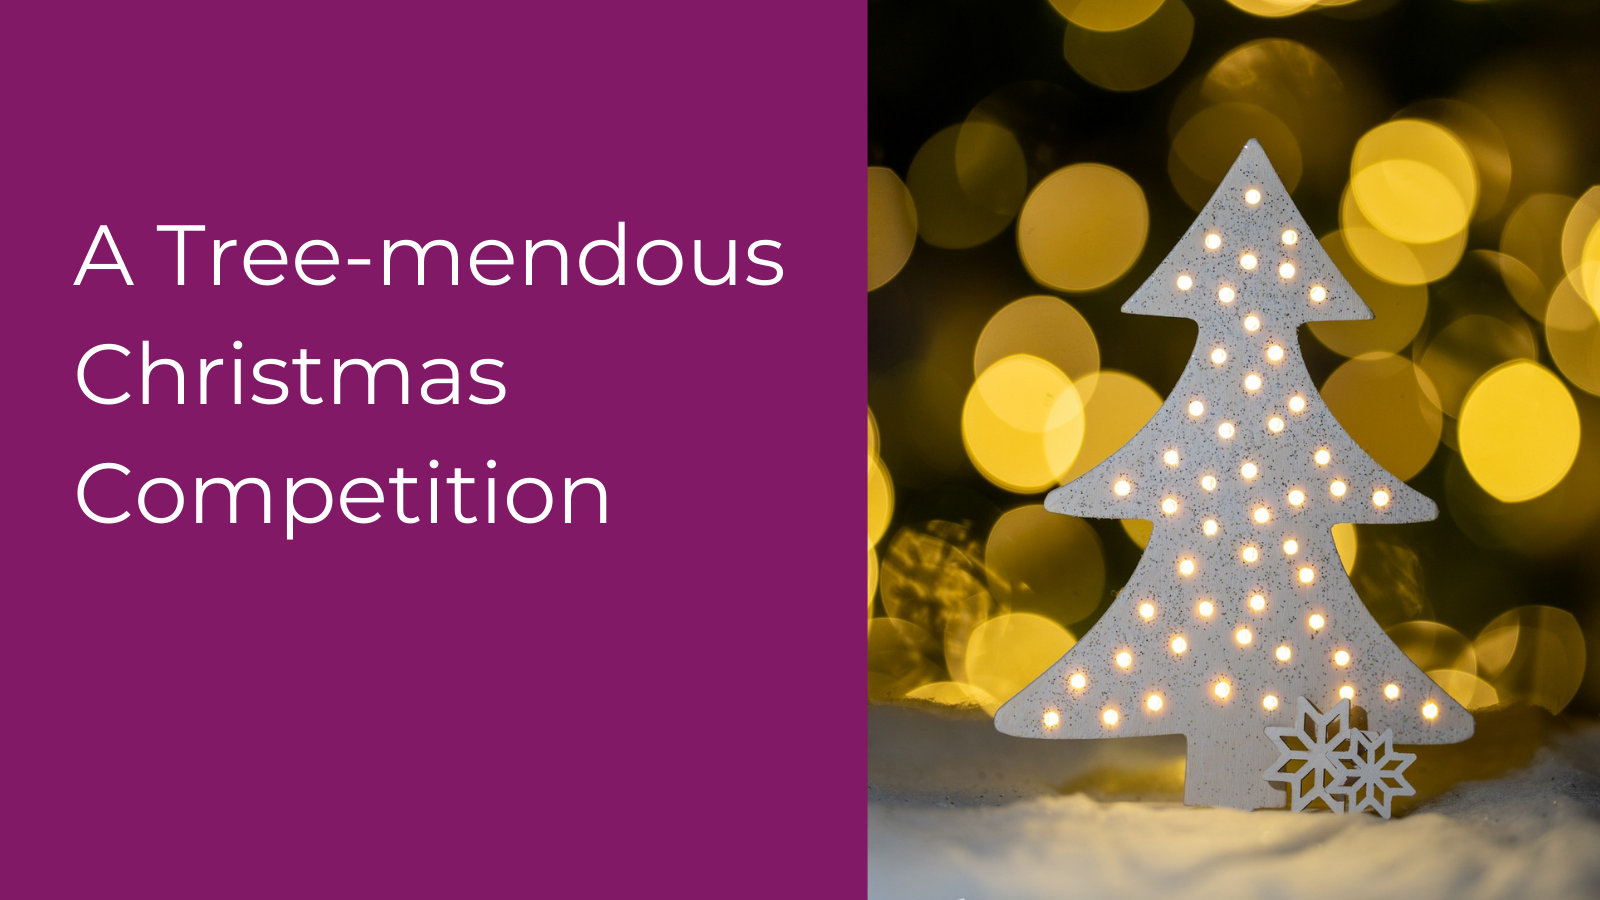 A Tree-mendous Christmas Competition